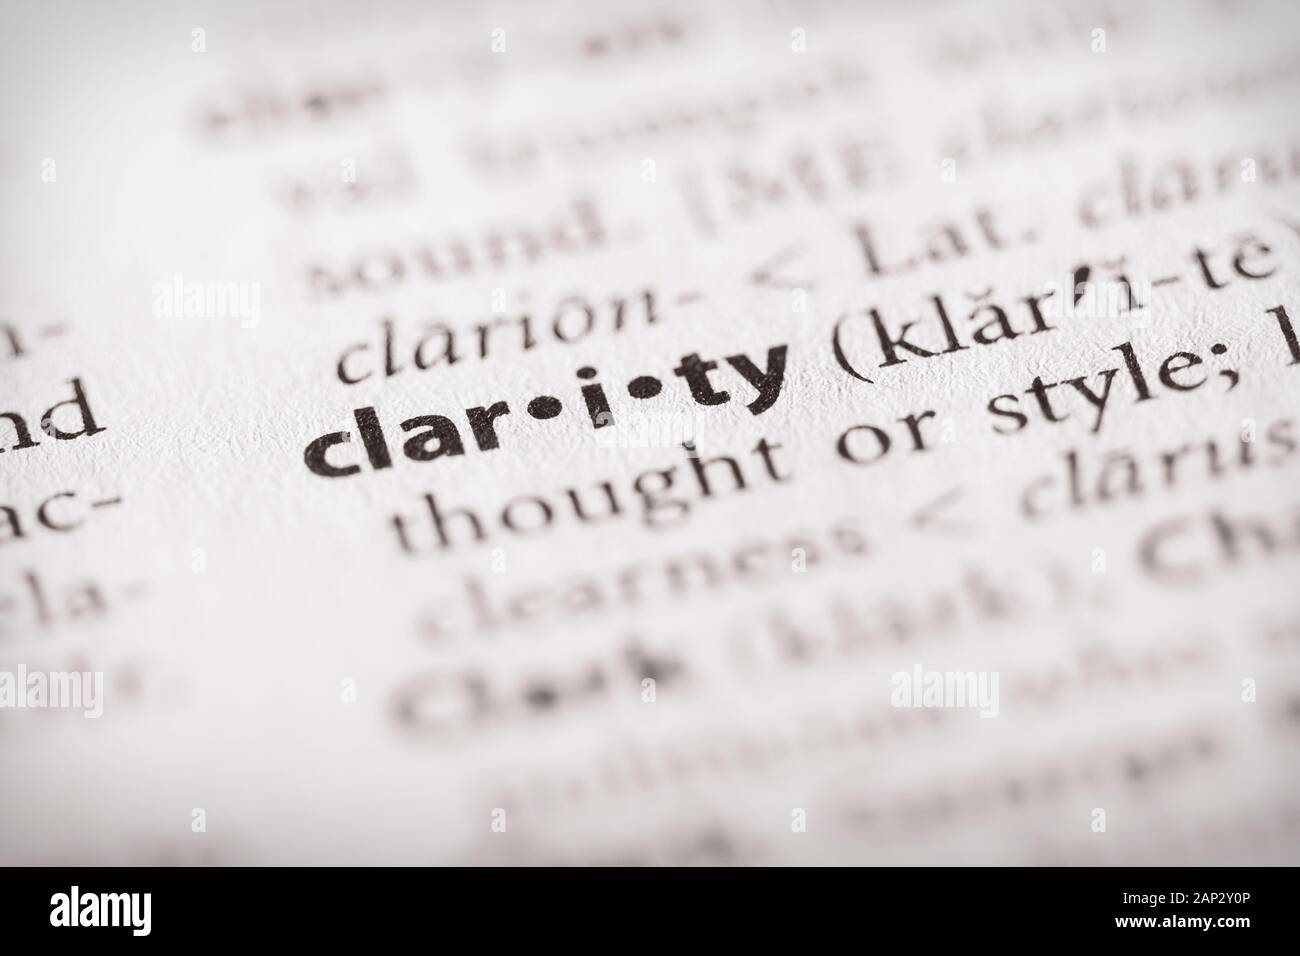 Selective focus on the word clarity. Many more word photos in my portfolio. Stock Photo